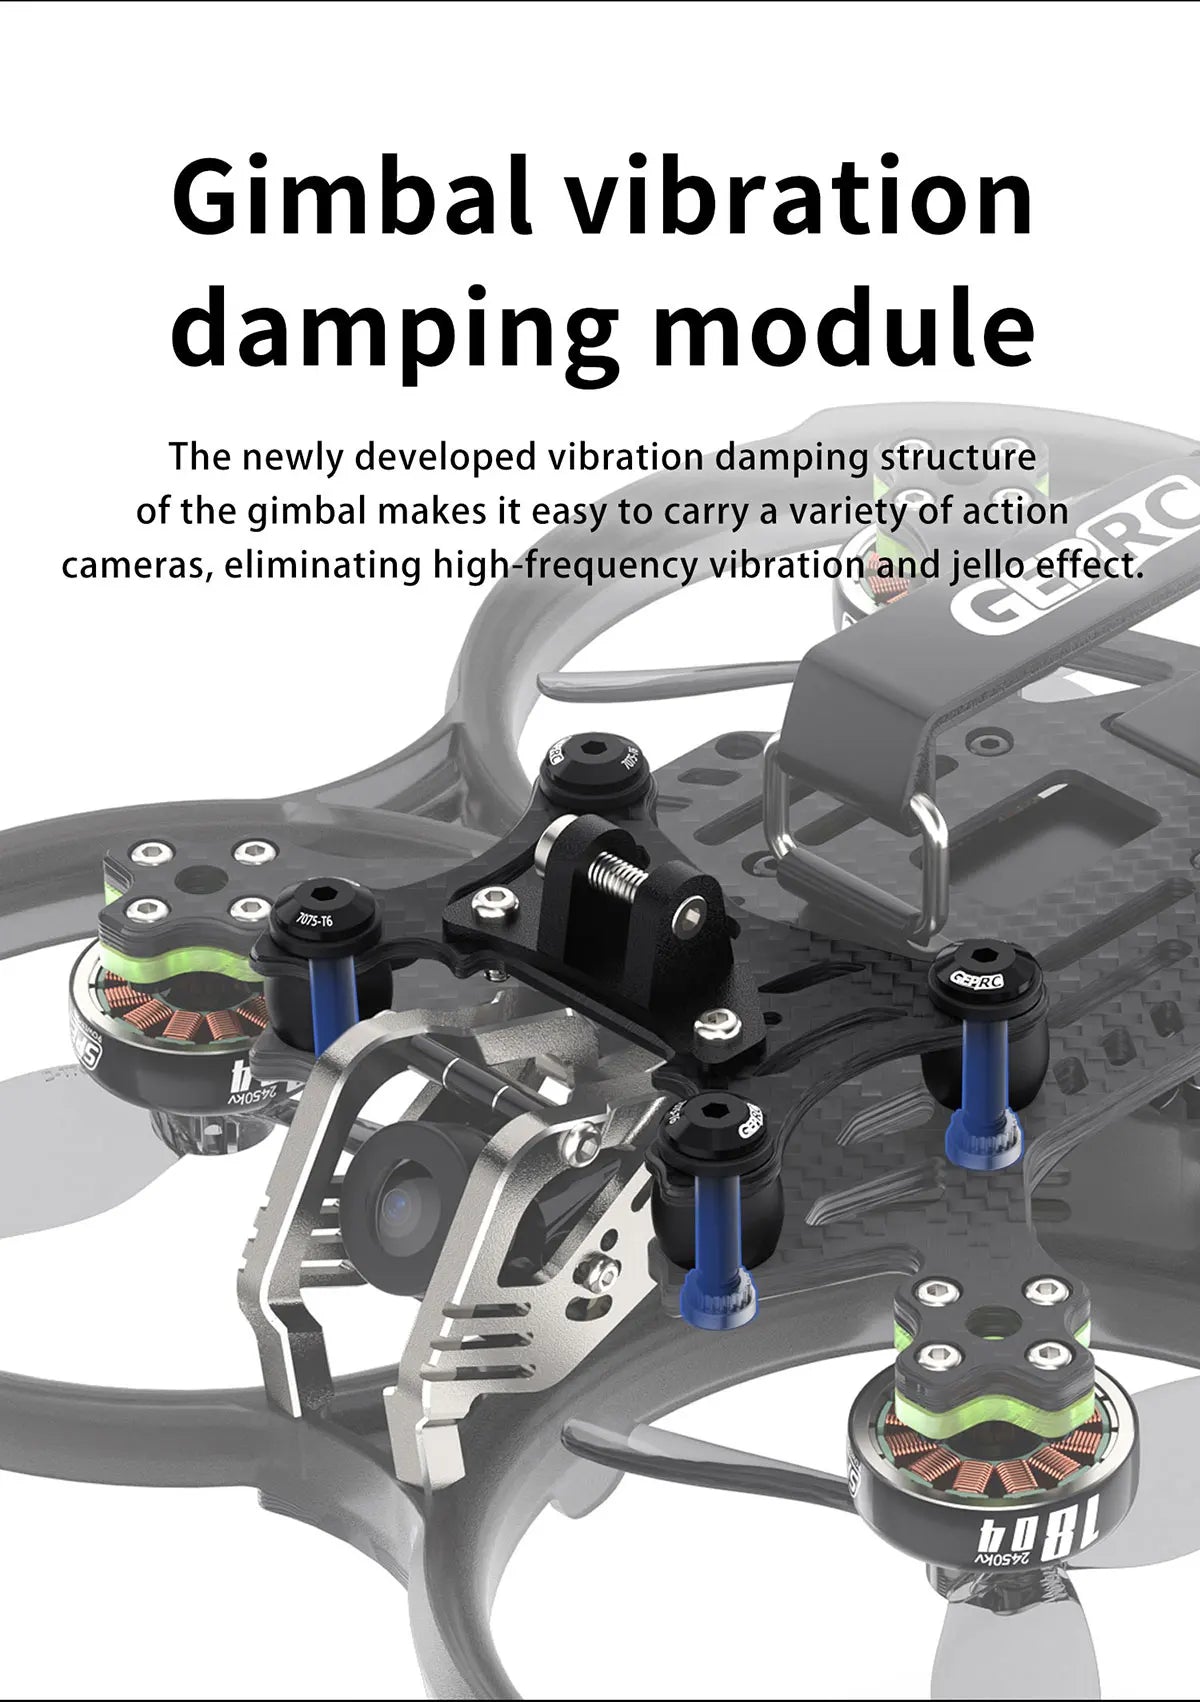 GEPRC Cinebot30 FPV Drone, gimbal's vibration damping structure eliminates high-frequency vibration and j